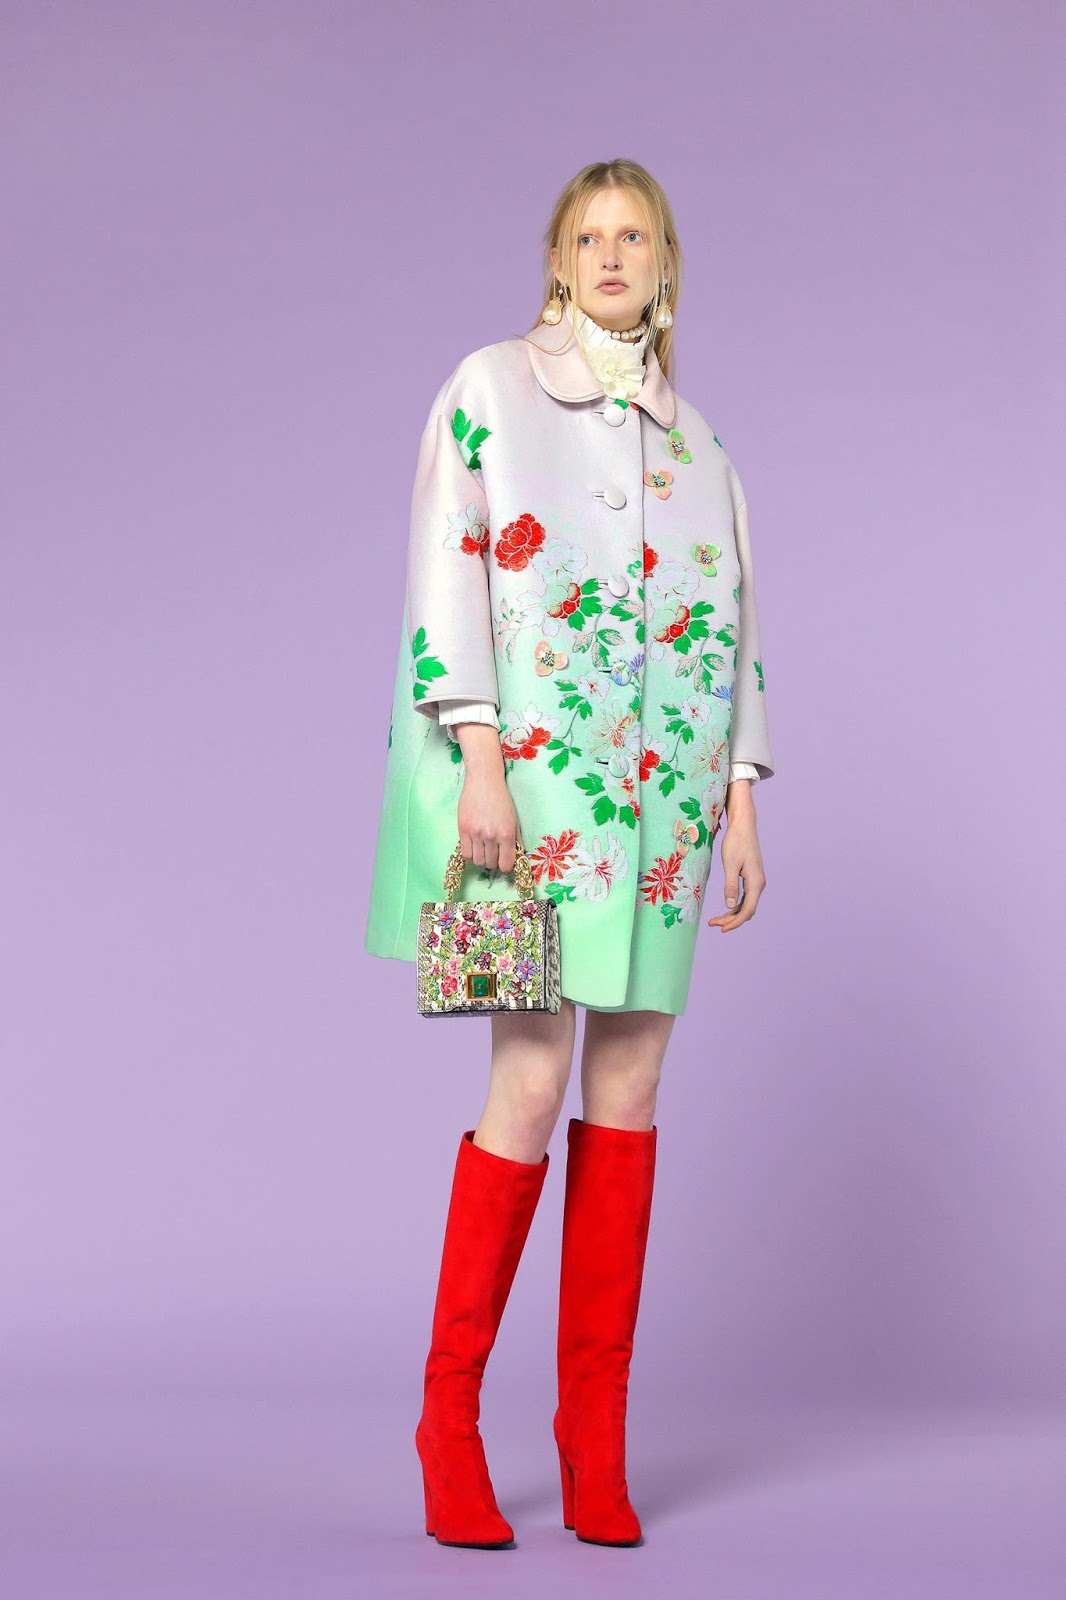 FLORAL FABULOUS: ANDREW GN